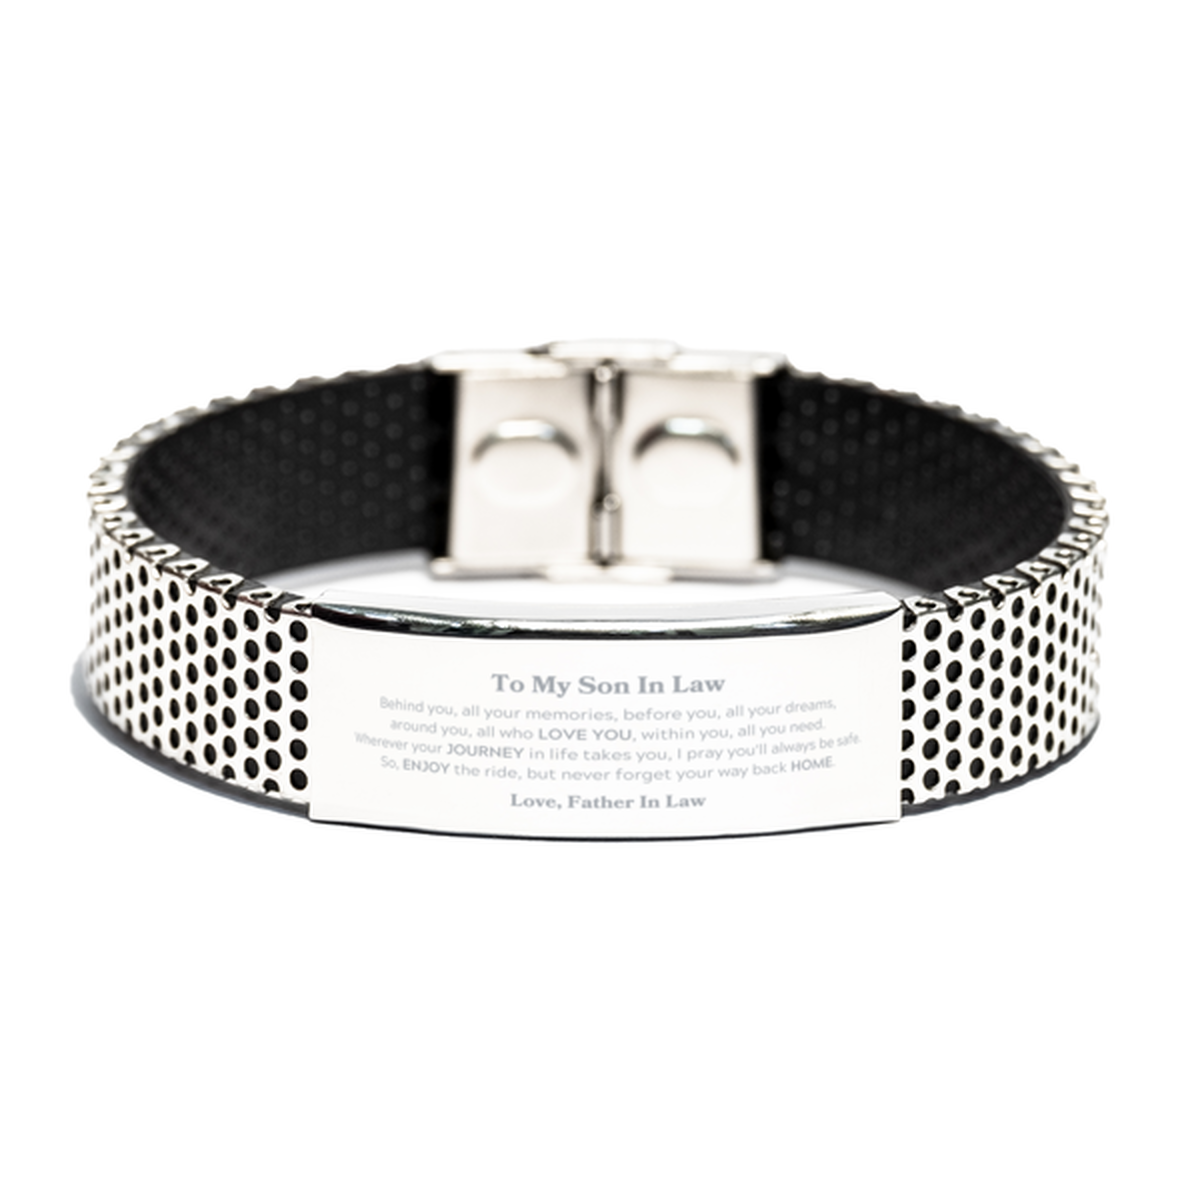 To My Son In Law Graduation Gifts from Father In Law, Son In Law Stainless Steel Bracelet Christmas Birthday Gifts for Son In Law Behind you, all your memories, before you, all your dreams. Love, Father In Law